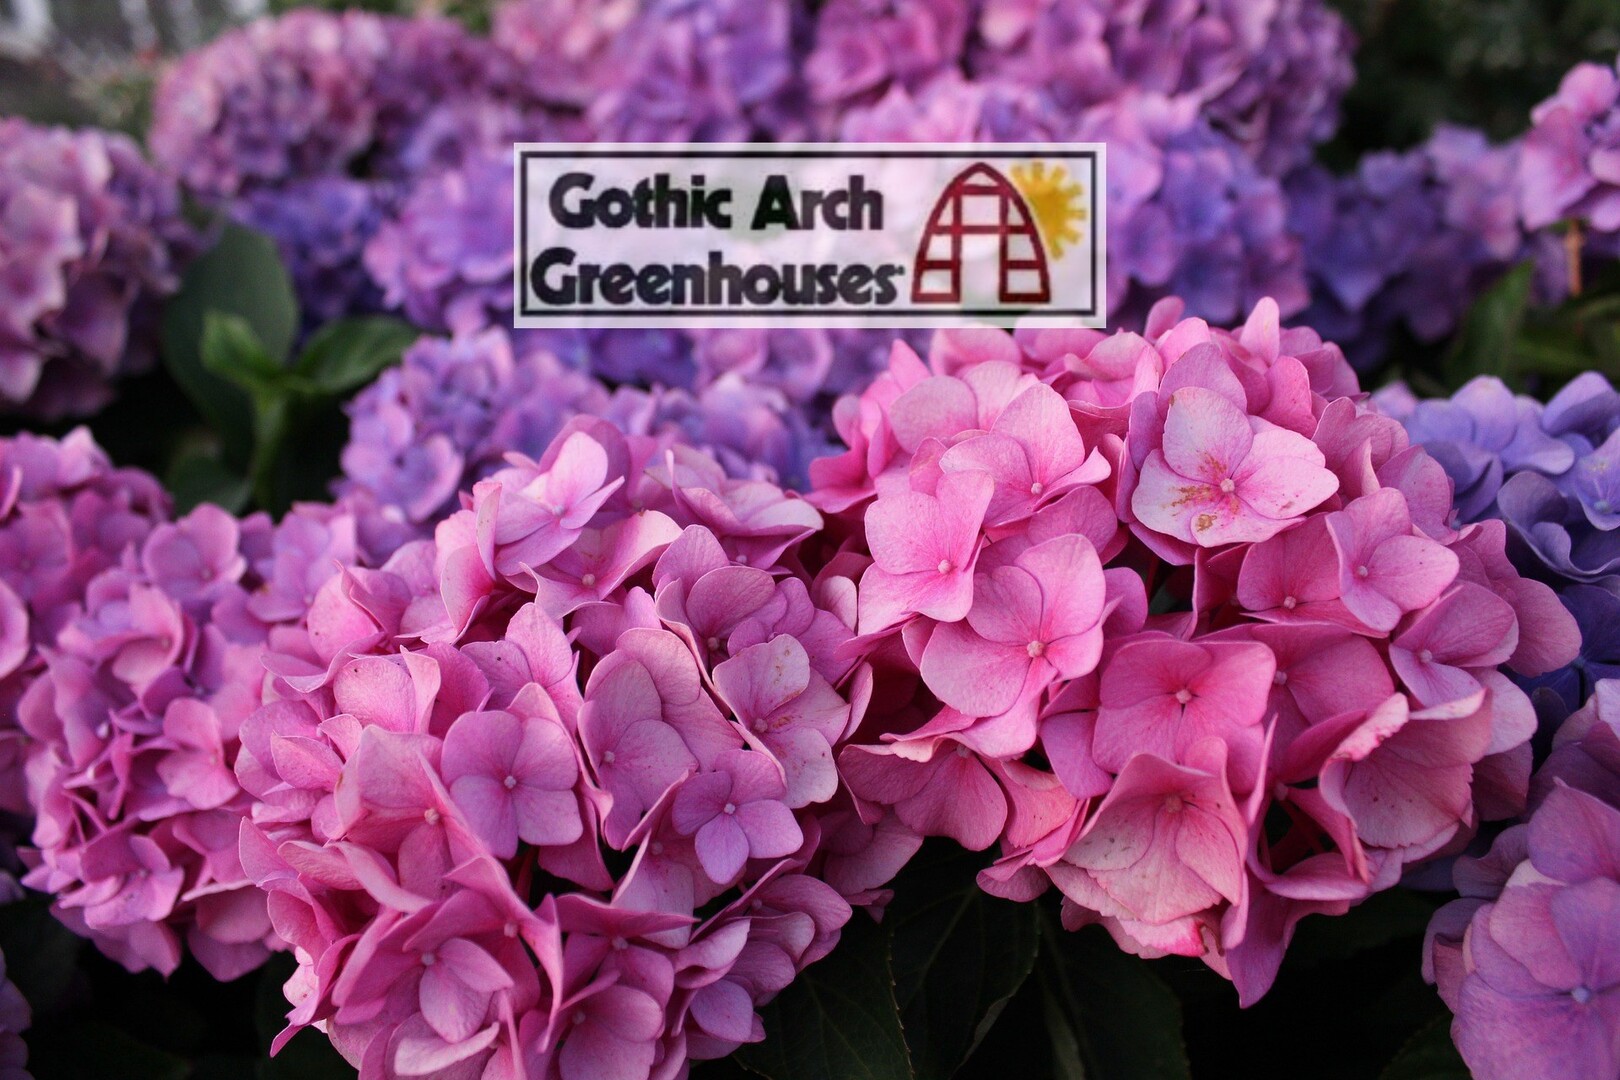 What You Need to Know About Caring for Hydrangeas